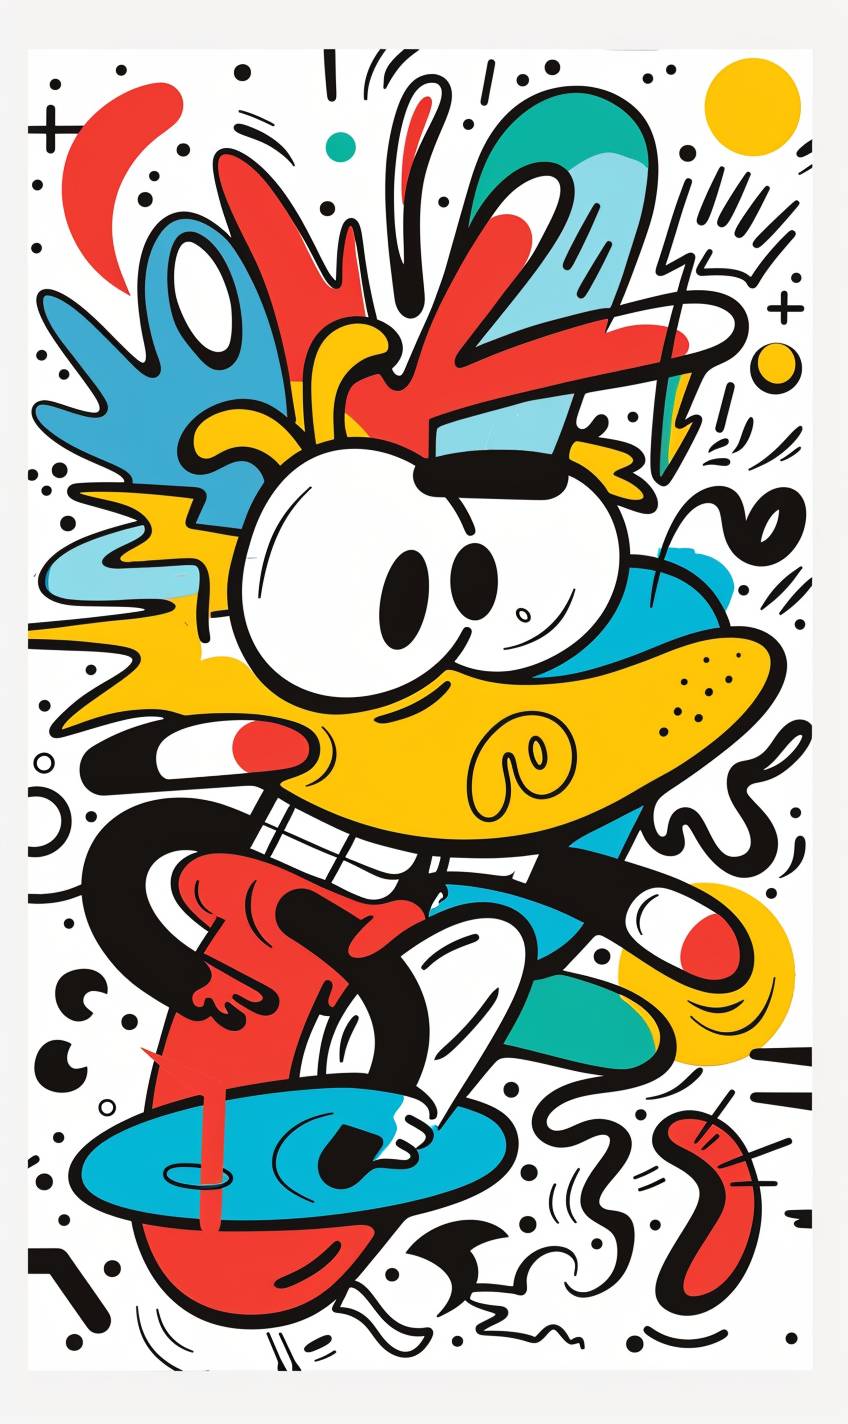 Abstract vector illustration of cartoon characters in the style of Keith Haring